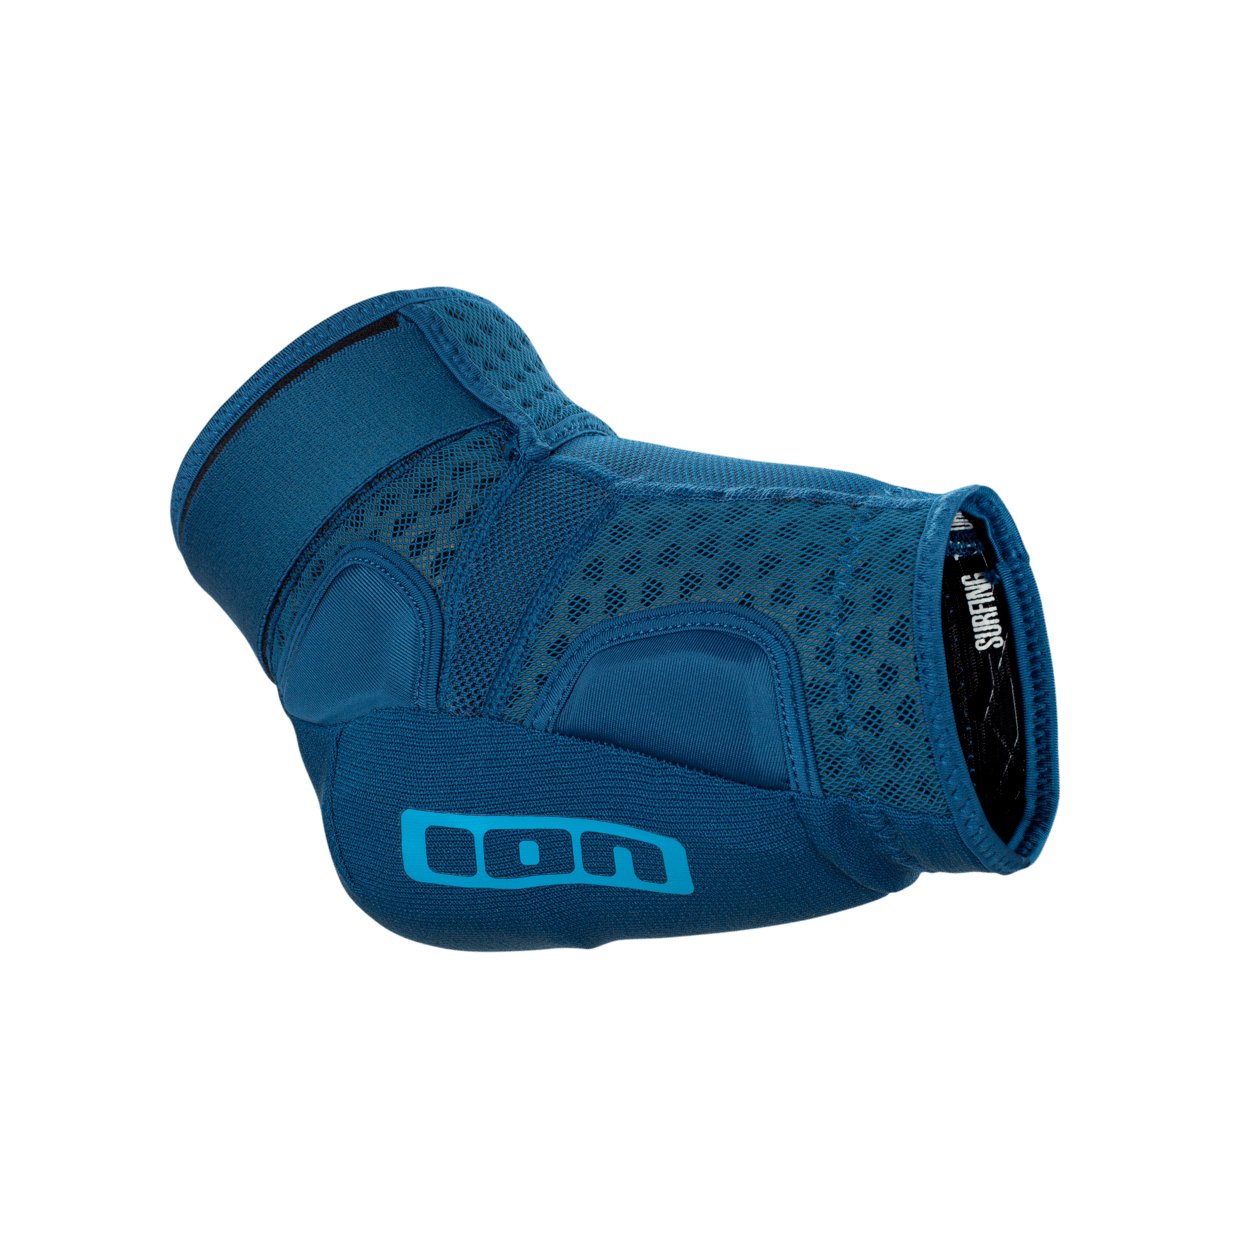 ION MTB Elbow Pads E-Pact 2024 - Worthing Watersports - 9008415829286 - Body Armor - ION Bike